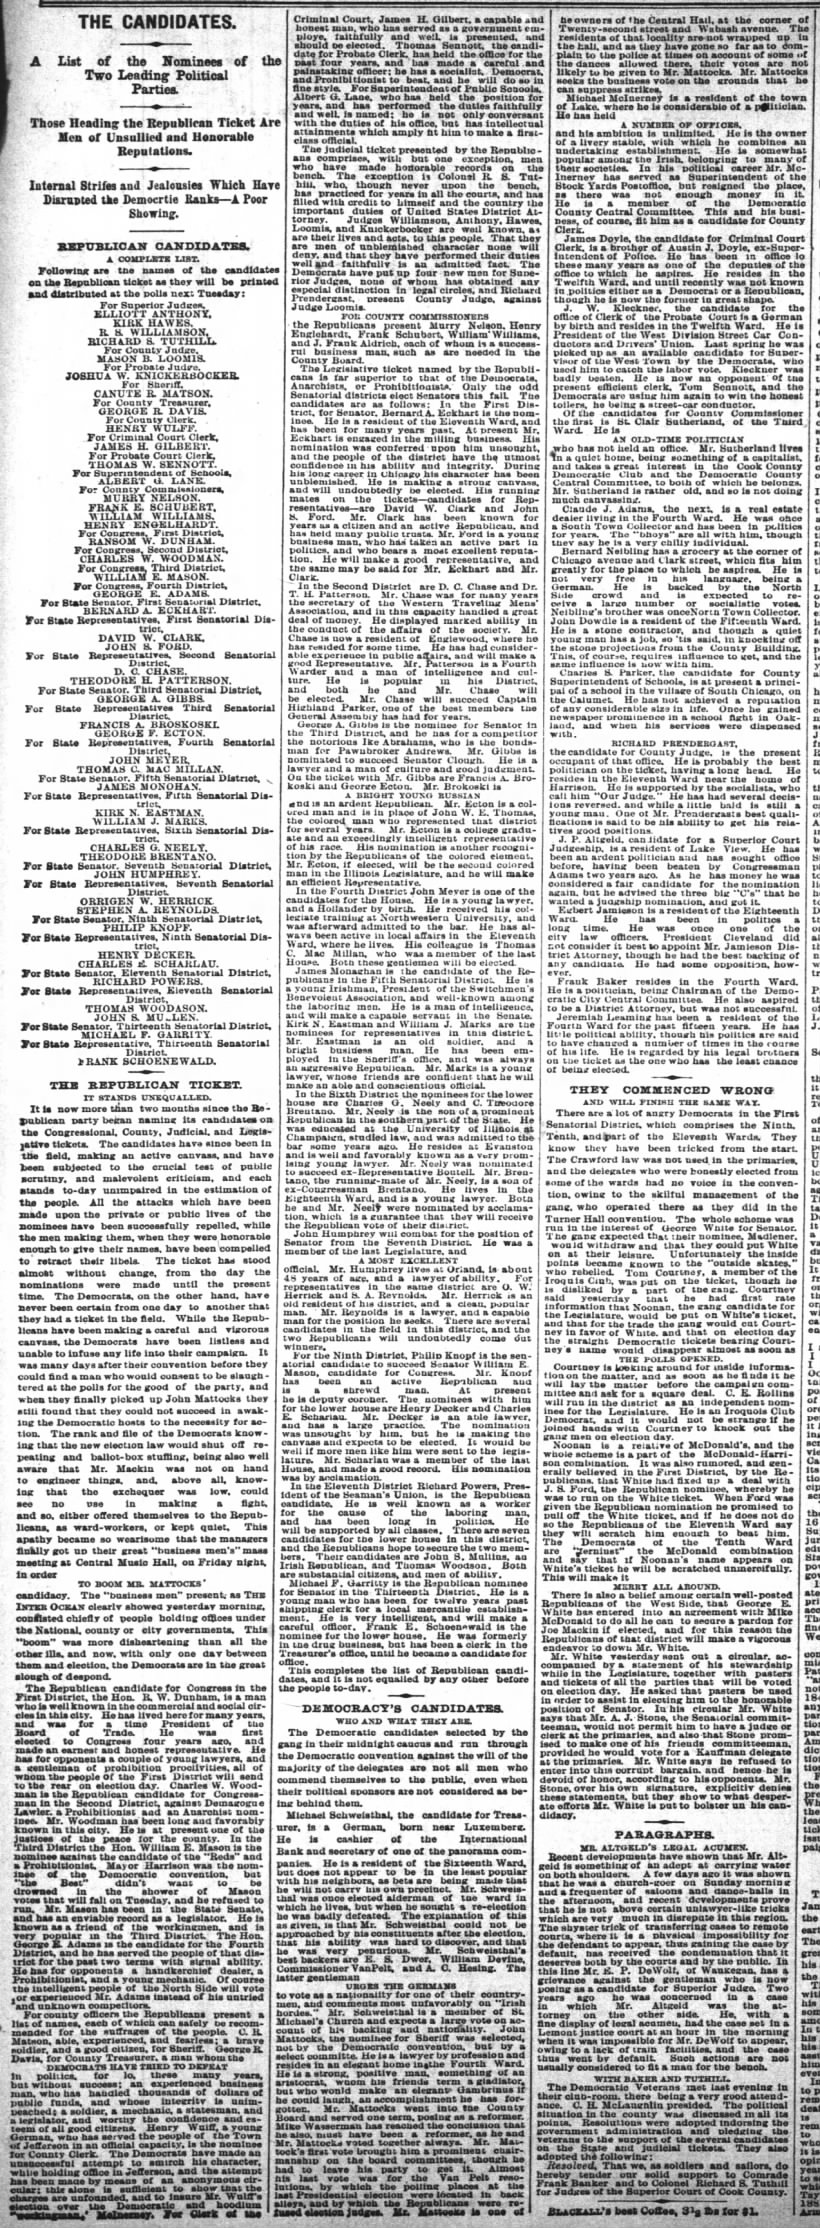 The Candidates, Inter Ocean (Chicago, Illinois) October 31, 1886, page 6